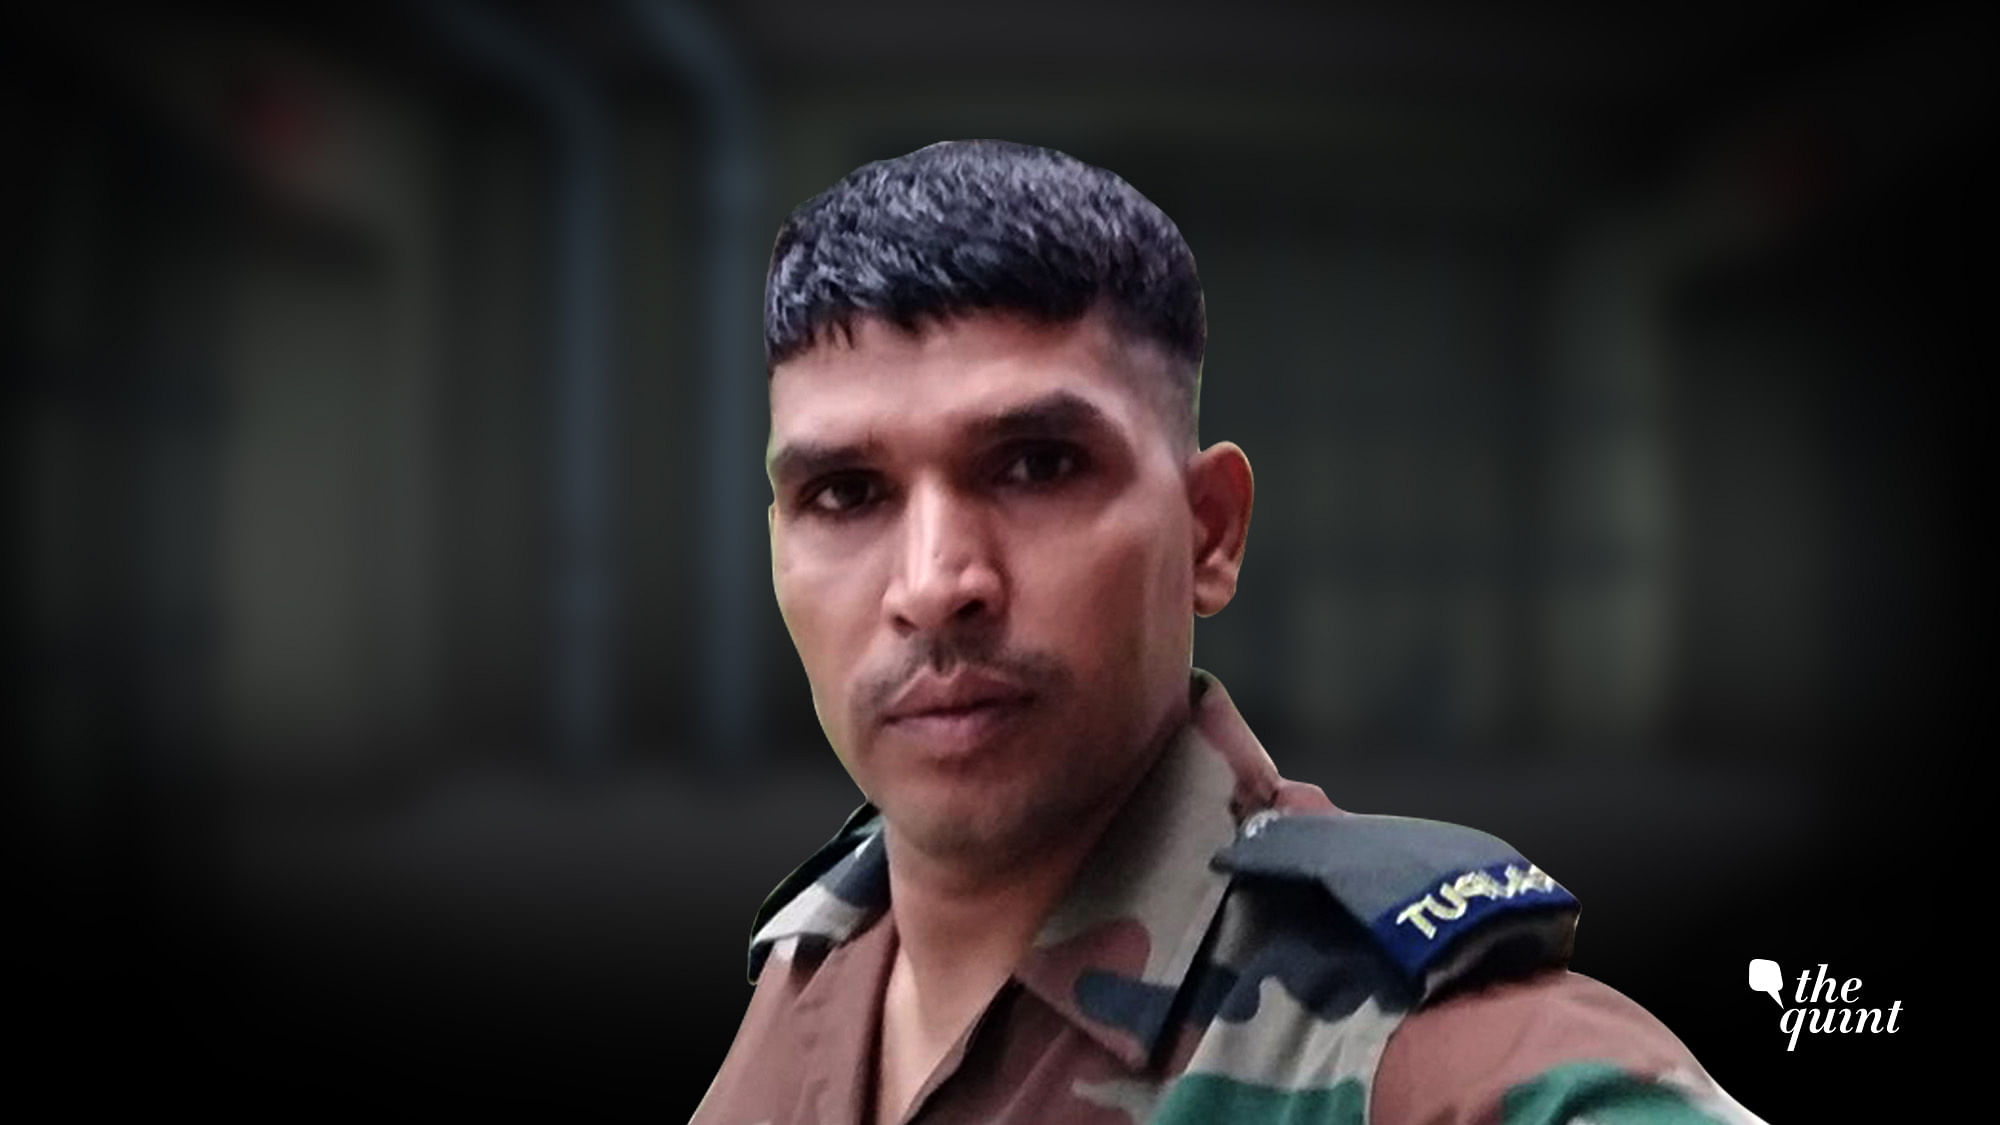 In January 2017, Lance Naik Yagya Pratap Singh, retired, spoke against the misuse of the sahayak system in the Indian Army.&nbsp;